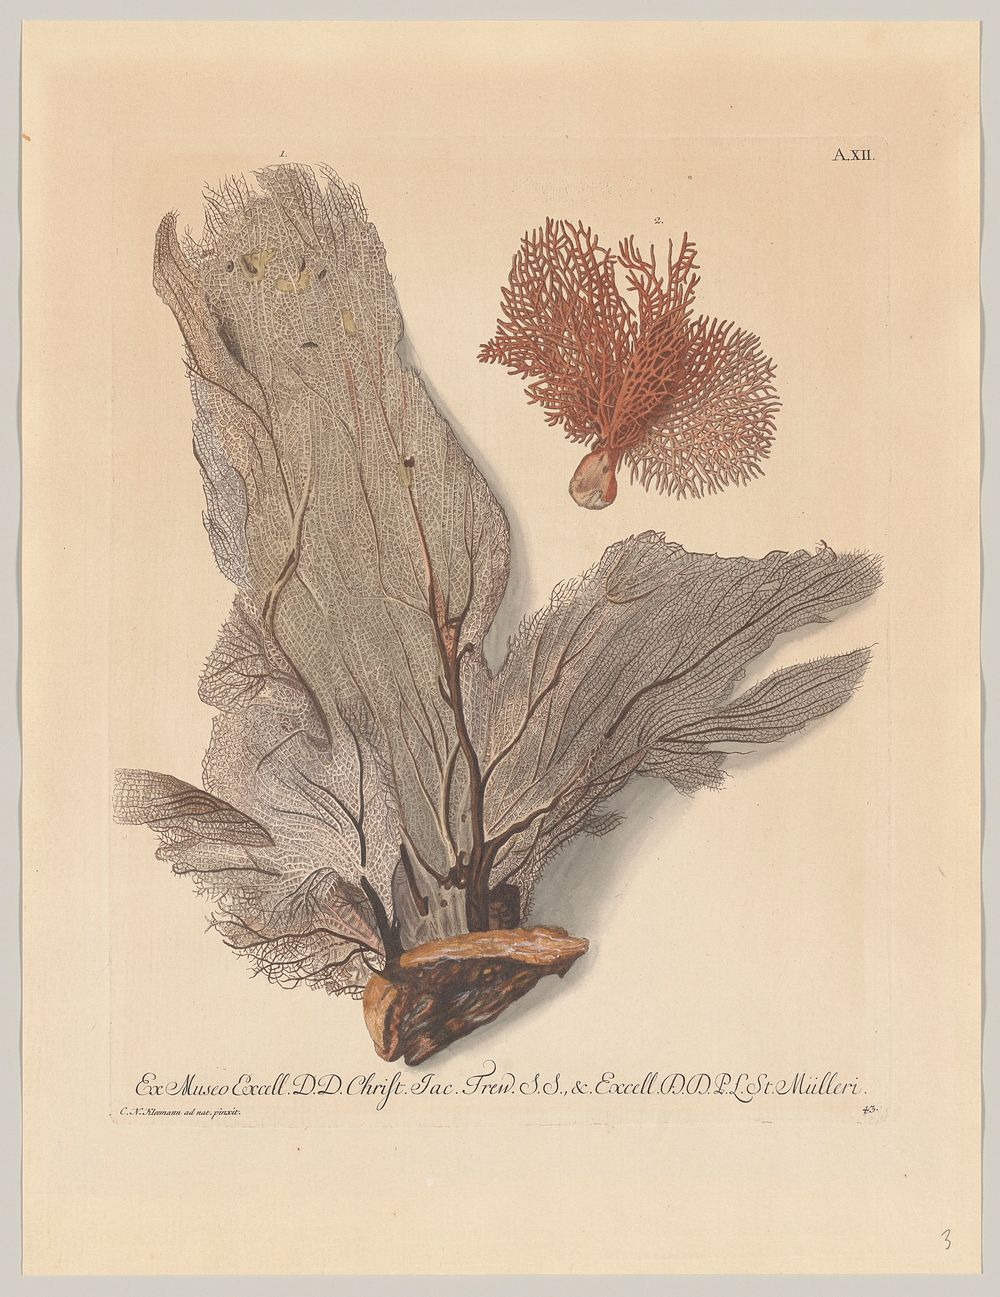 Plate A. XII;  from "Deliciae Naturae Selectae"